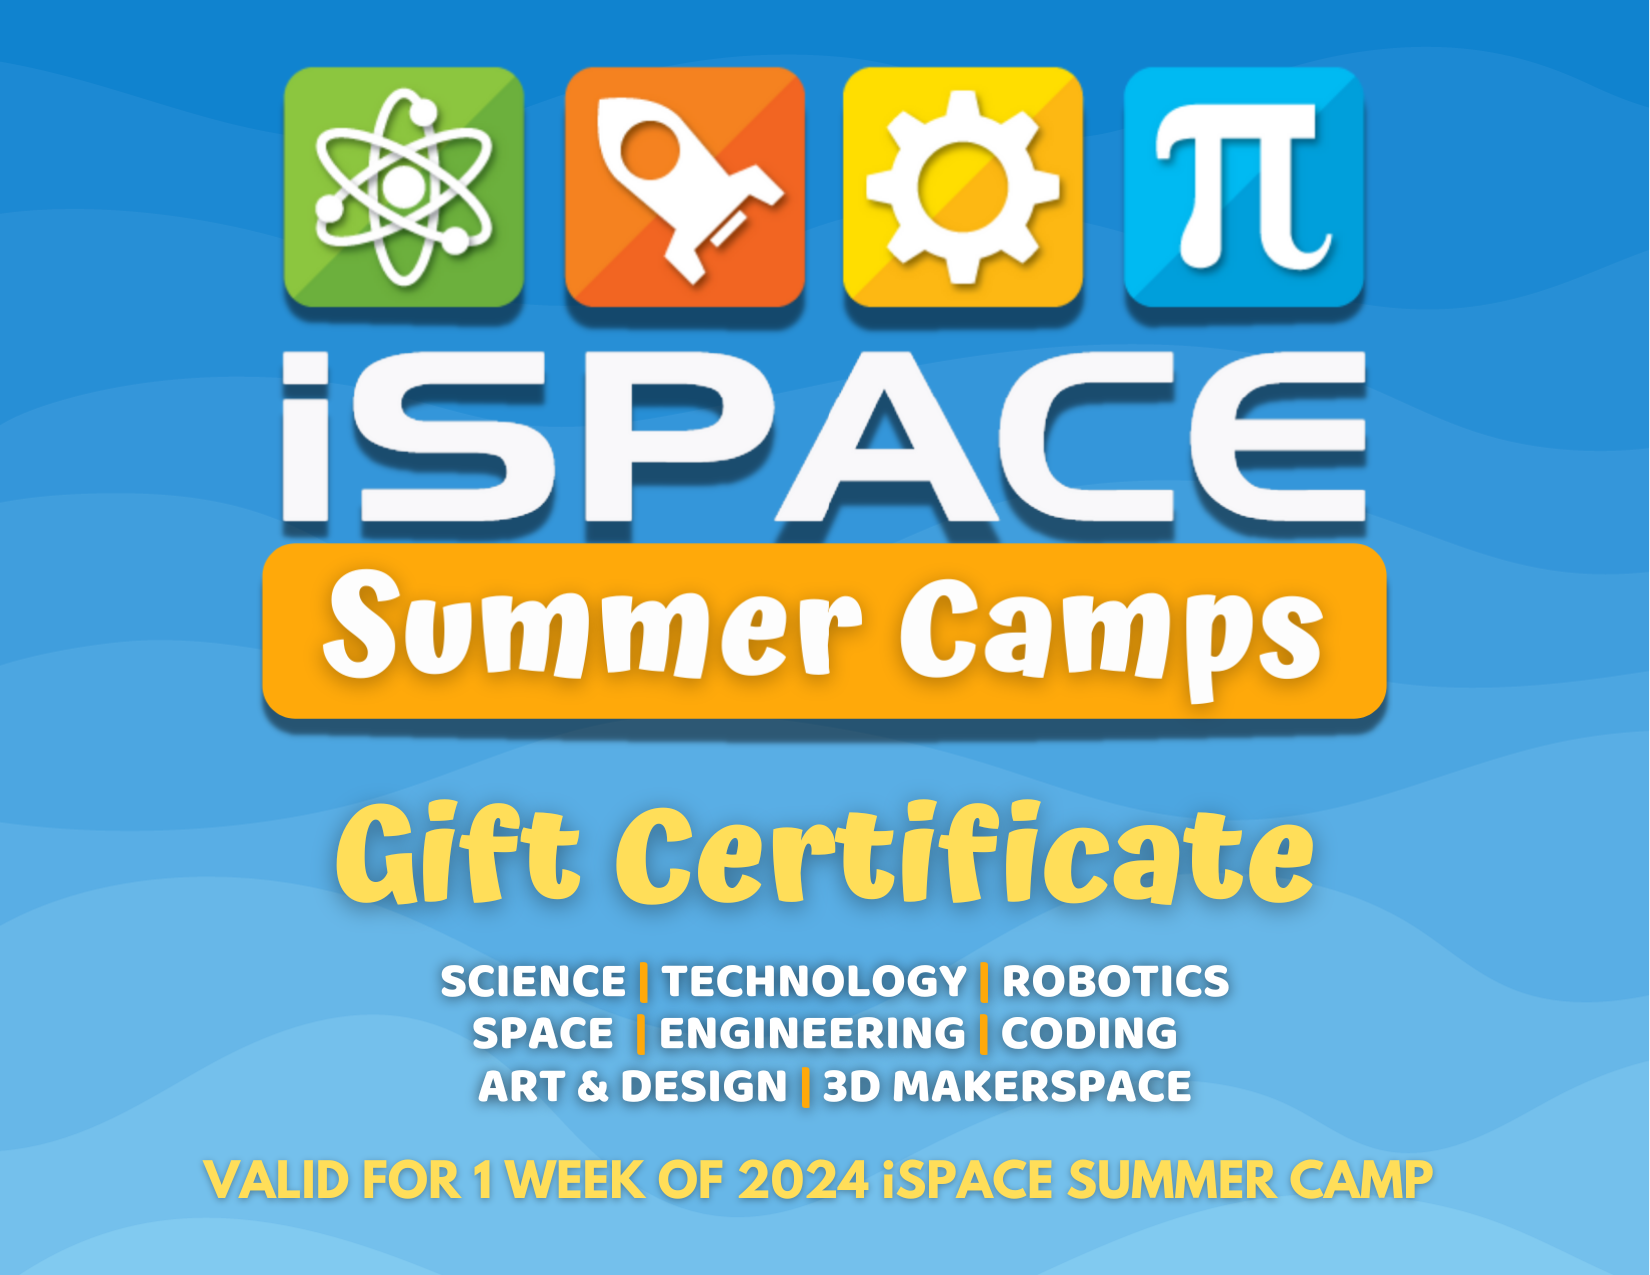 2024 iSPACE Summer Camp Gift Certificate